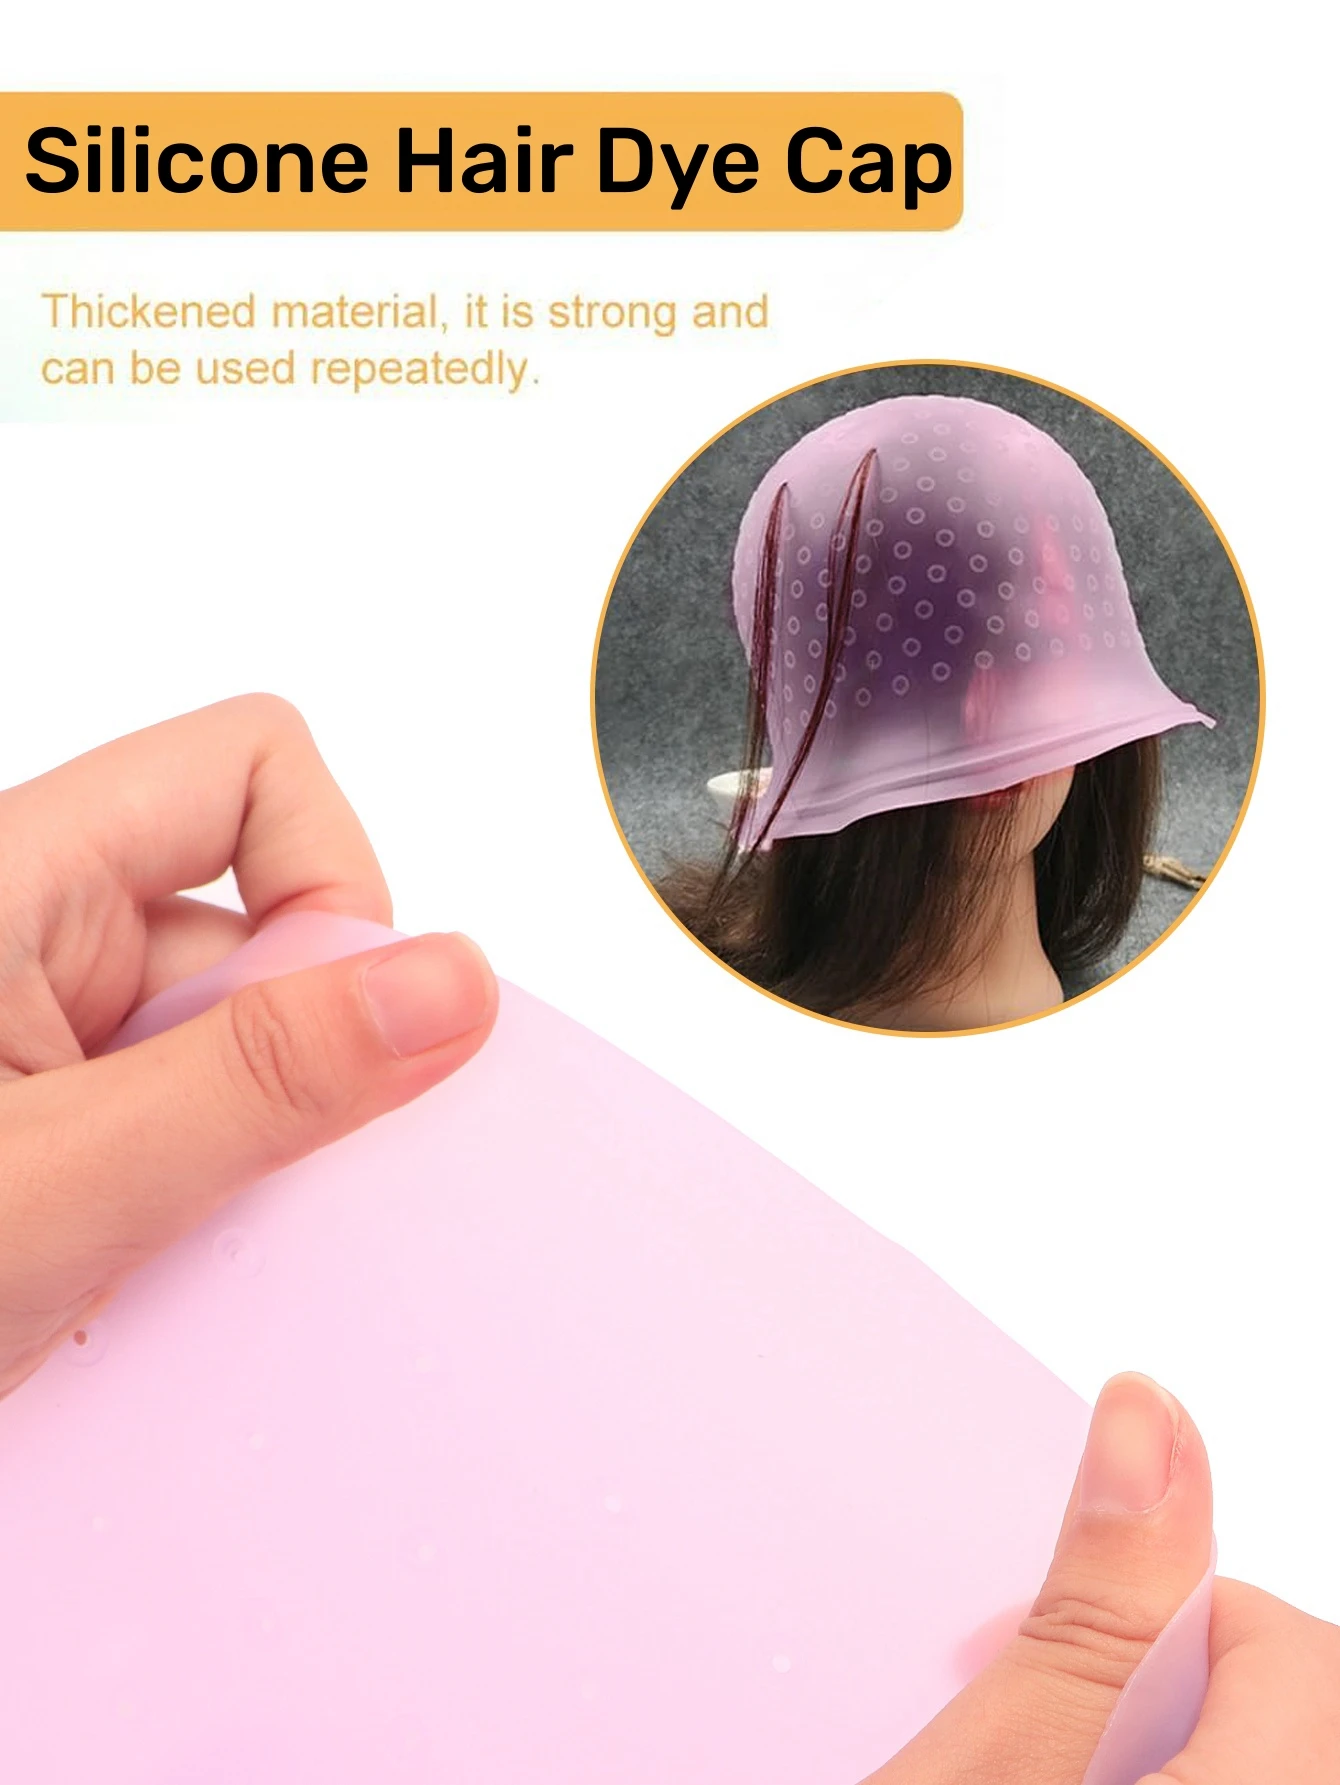 

Silicone Professional Color Dye Cap Hair Coloring Cap Hook Needle Highlighting Reusable Set Frosting Dyeing Tools Beauty Salon